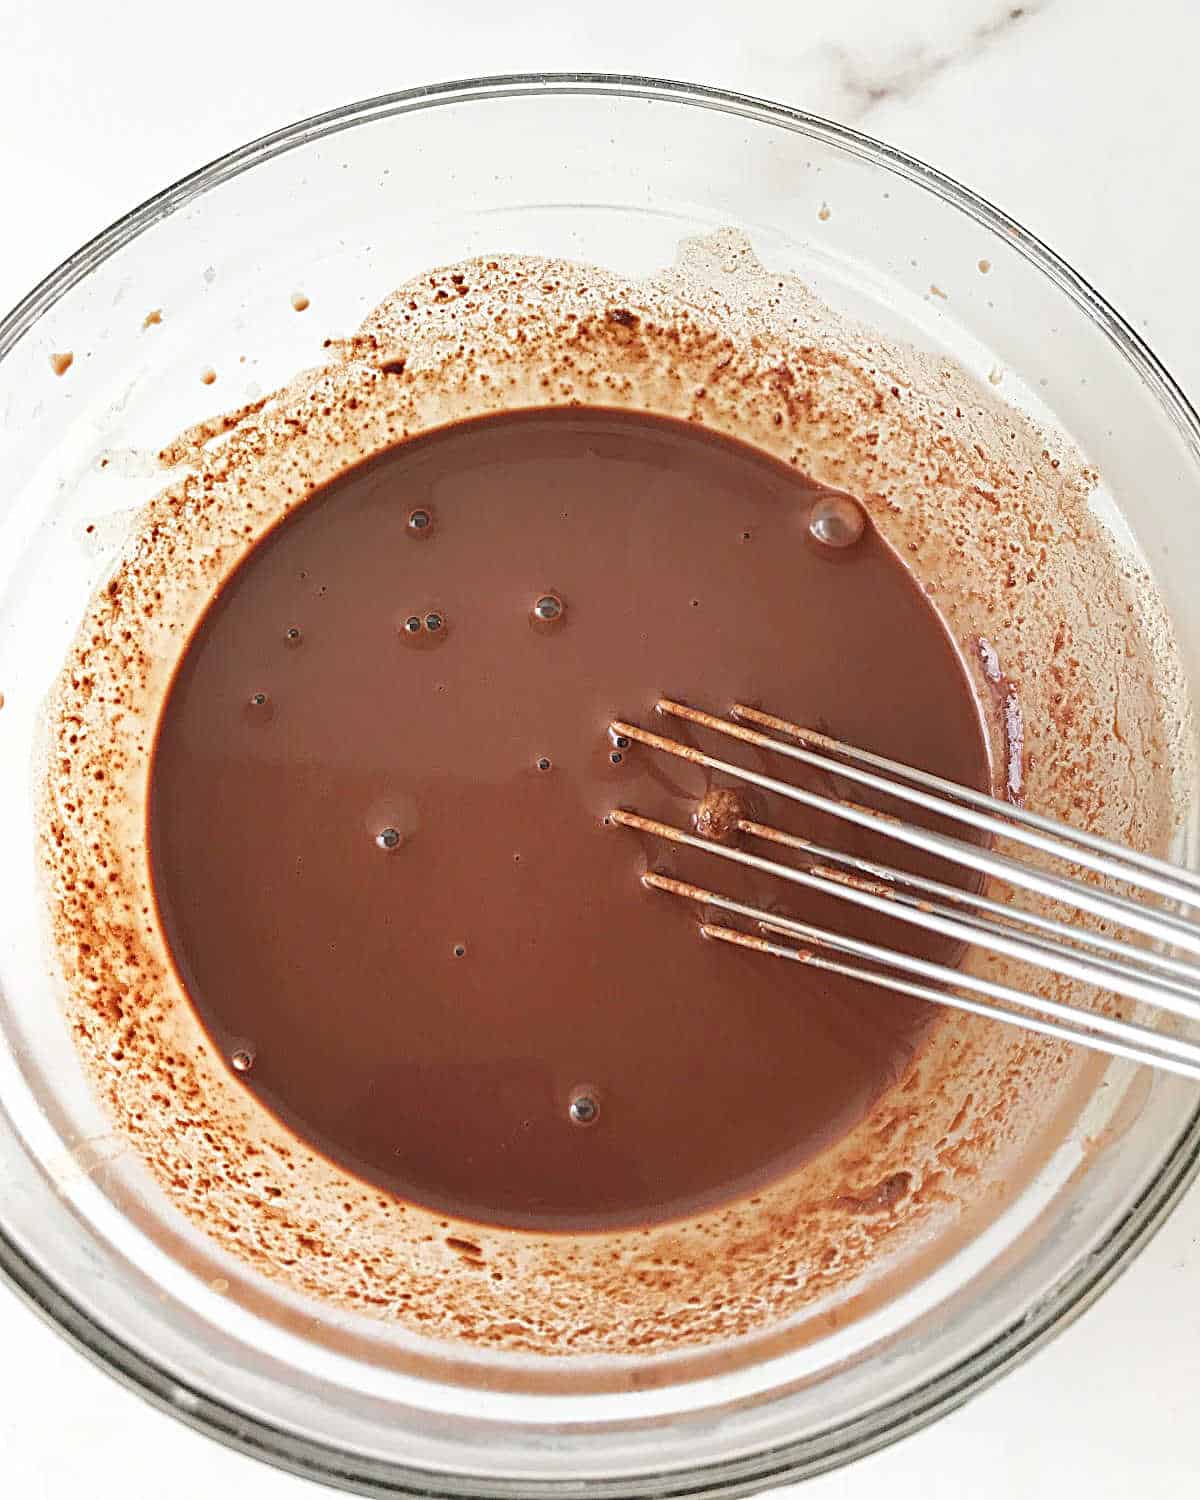 Chocolate custard in a glass bowl with a whisk.